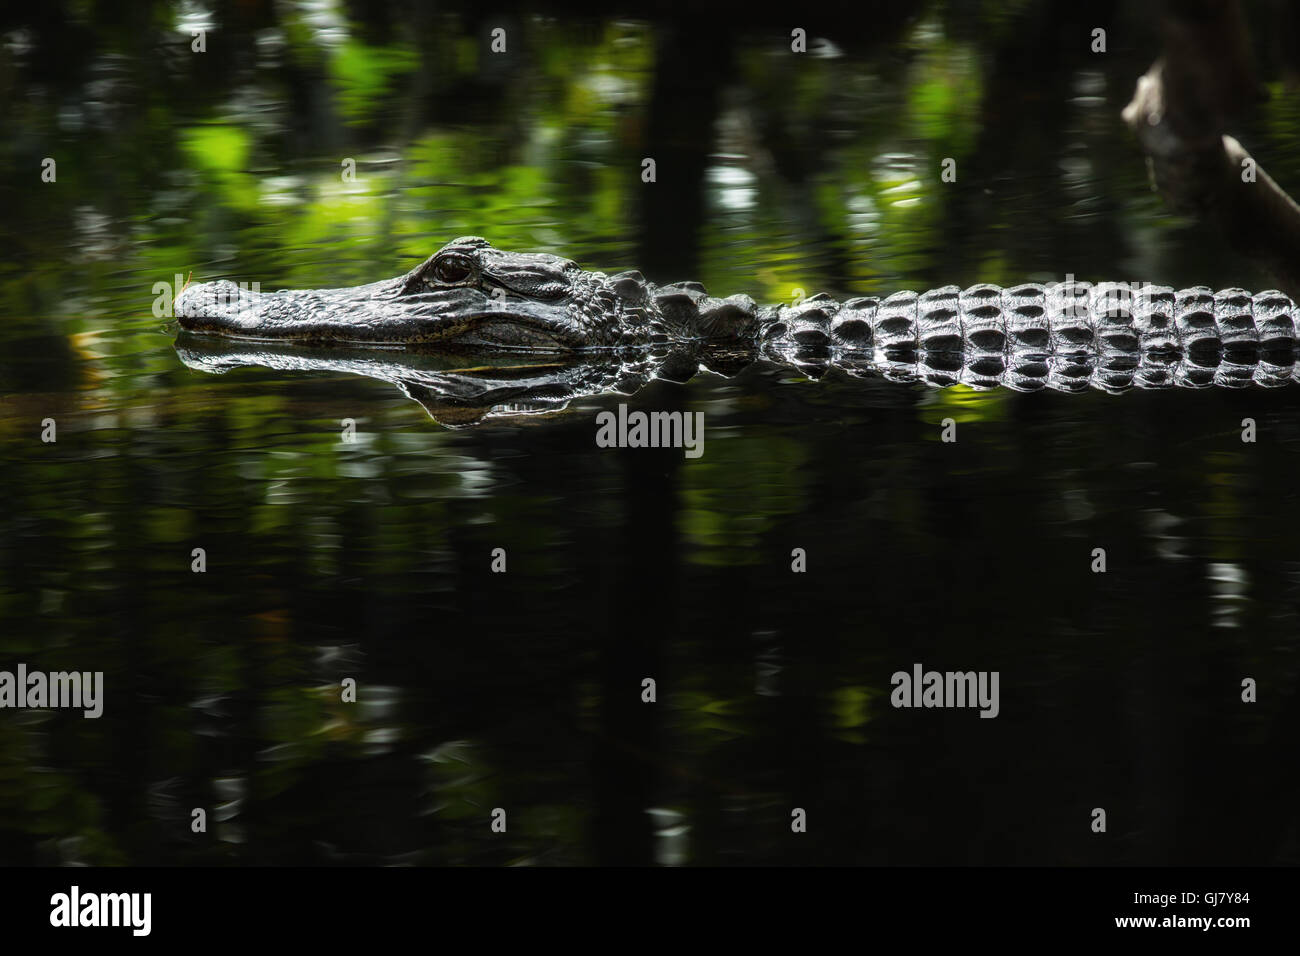 An American Alligator is reflected in swamp waters as harsh midday light streams in making the water a brilliant green. Stock Photo